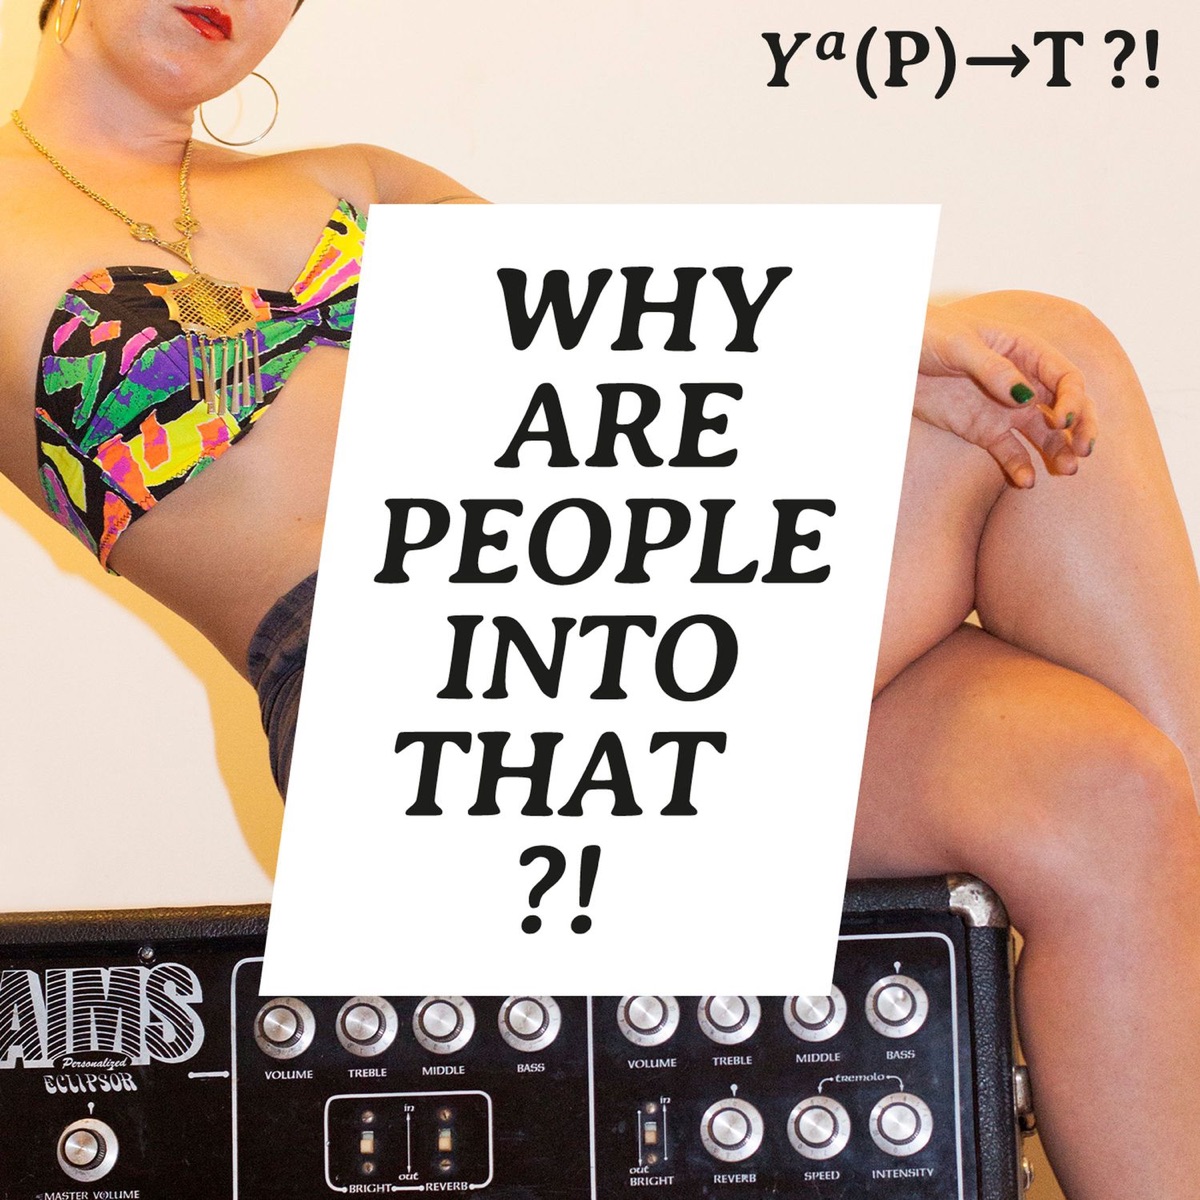 Bragers Porn Site - Why Are People Into That?! â€“ Podcast â€“ Podtail